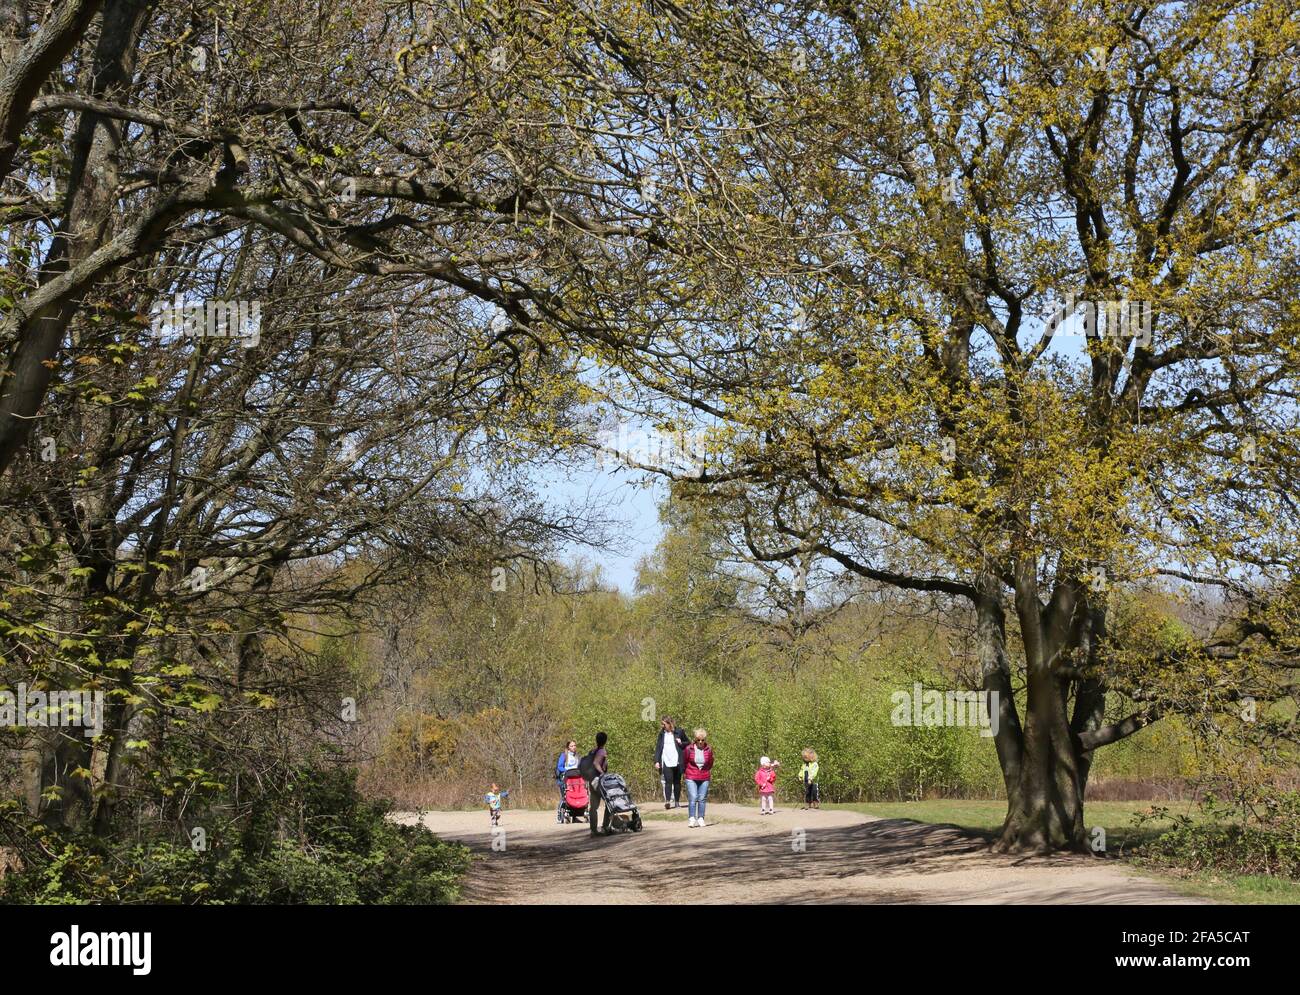 A family group walking through woods on Wimbledon Common, south west London, UK. Sunny, spring day. Stock Photo